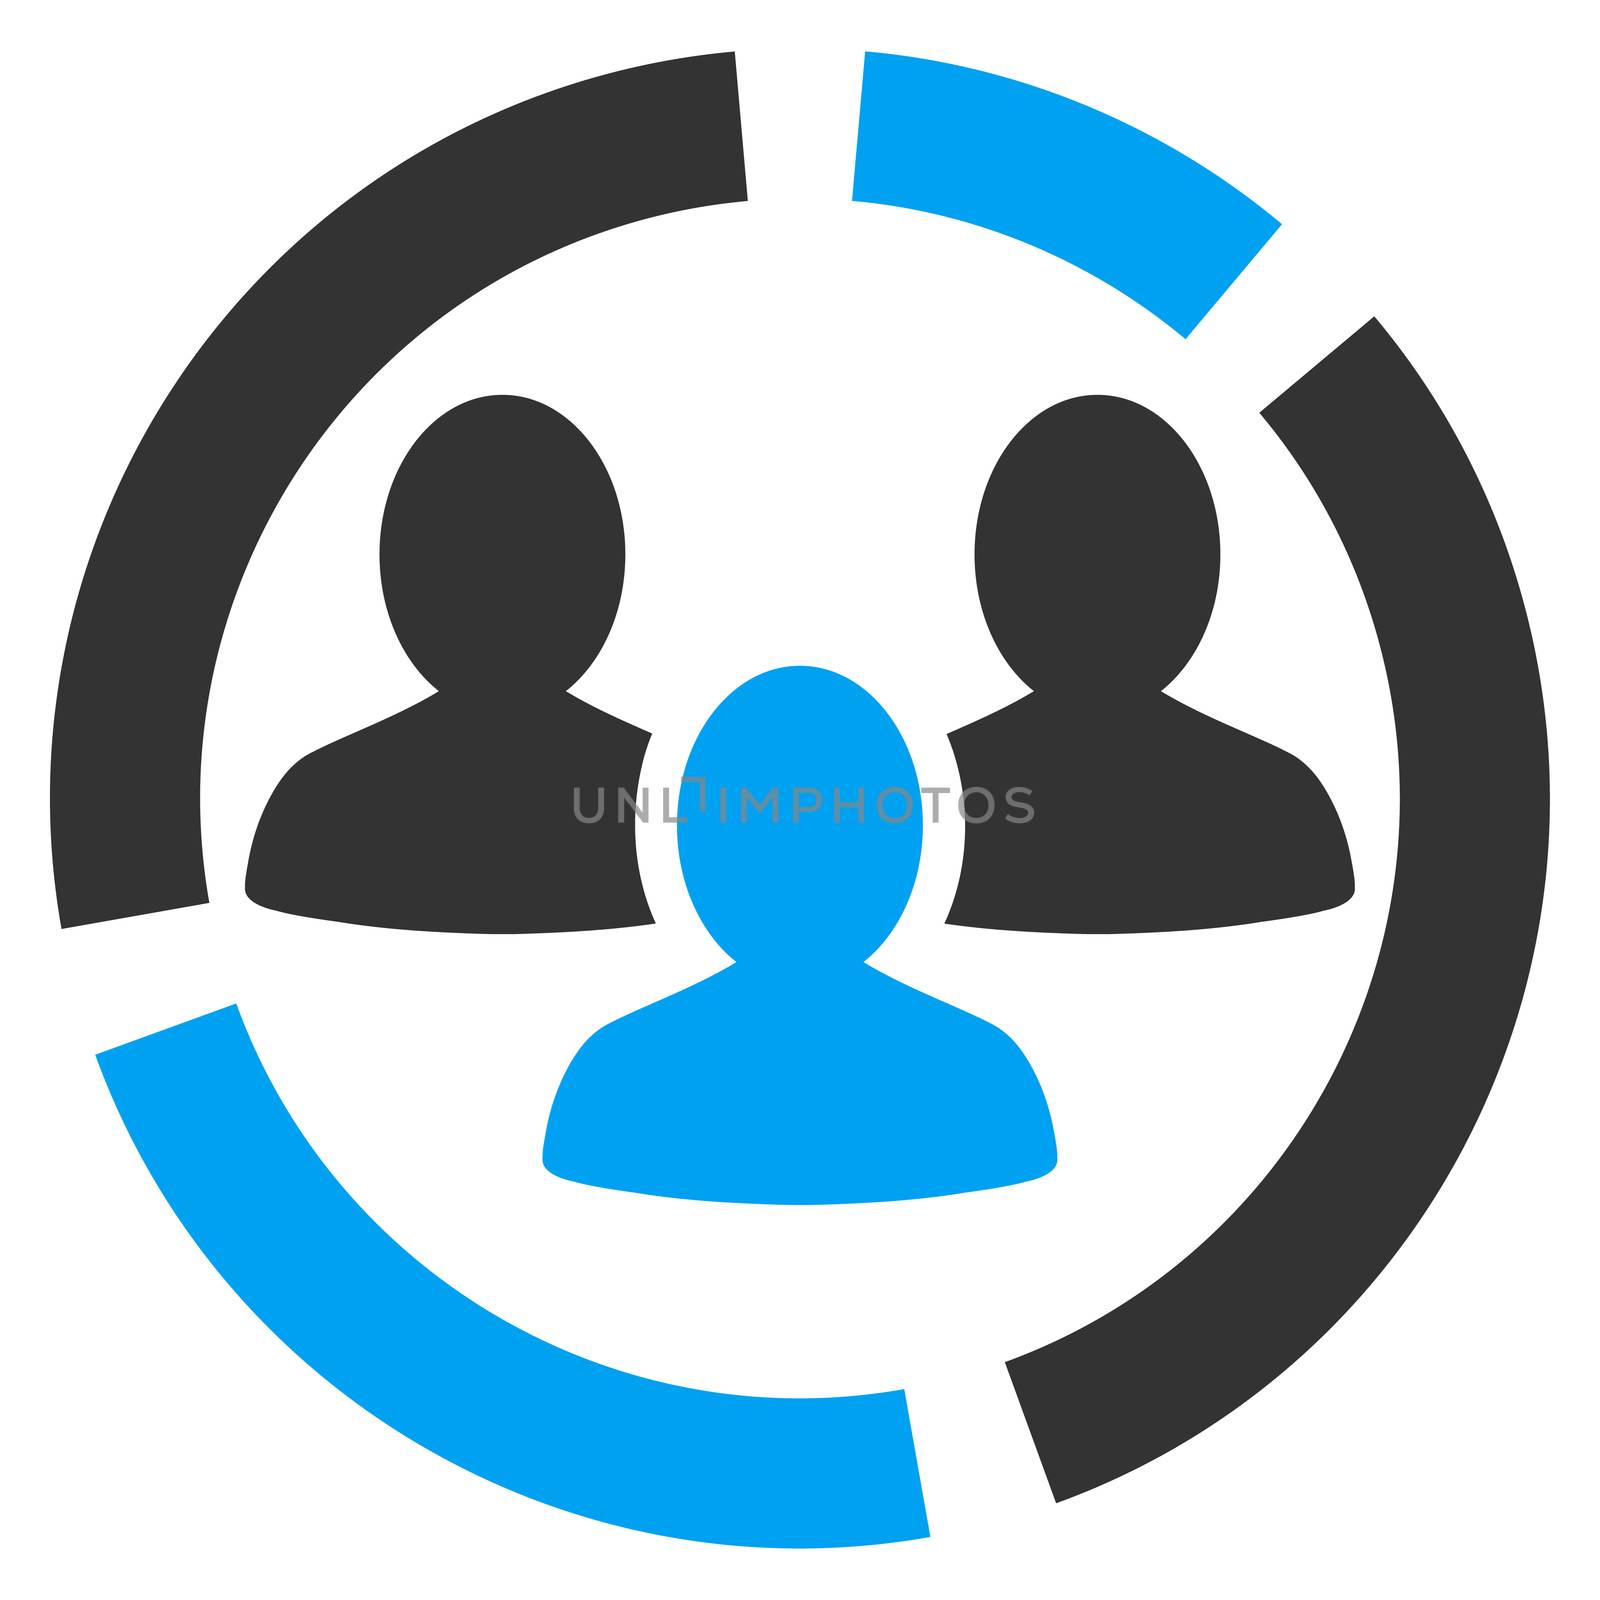 Demography diagram icon from Business Bicolor Set by ahasoft